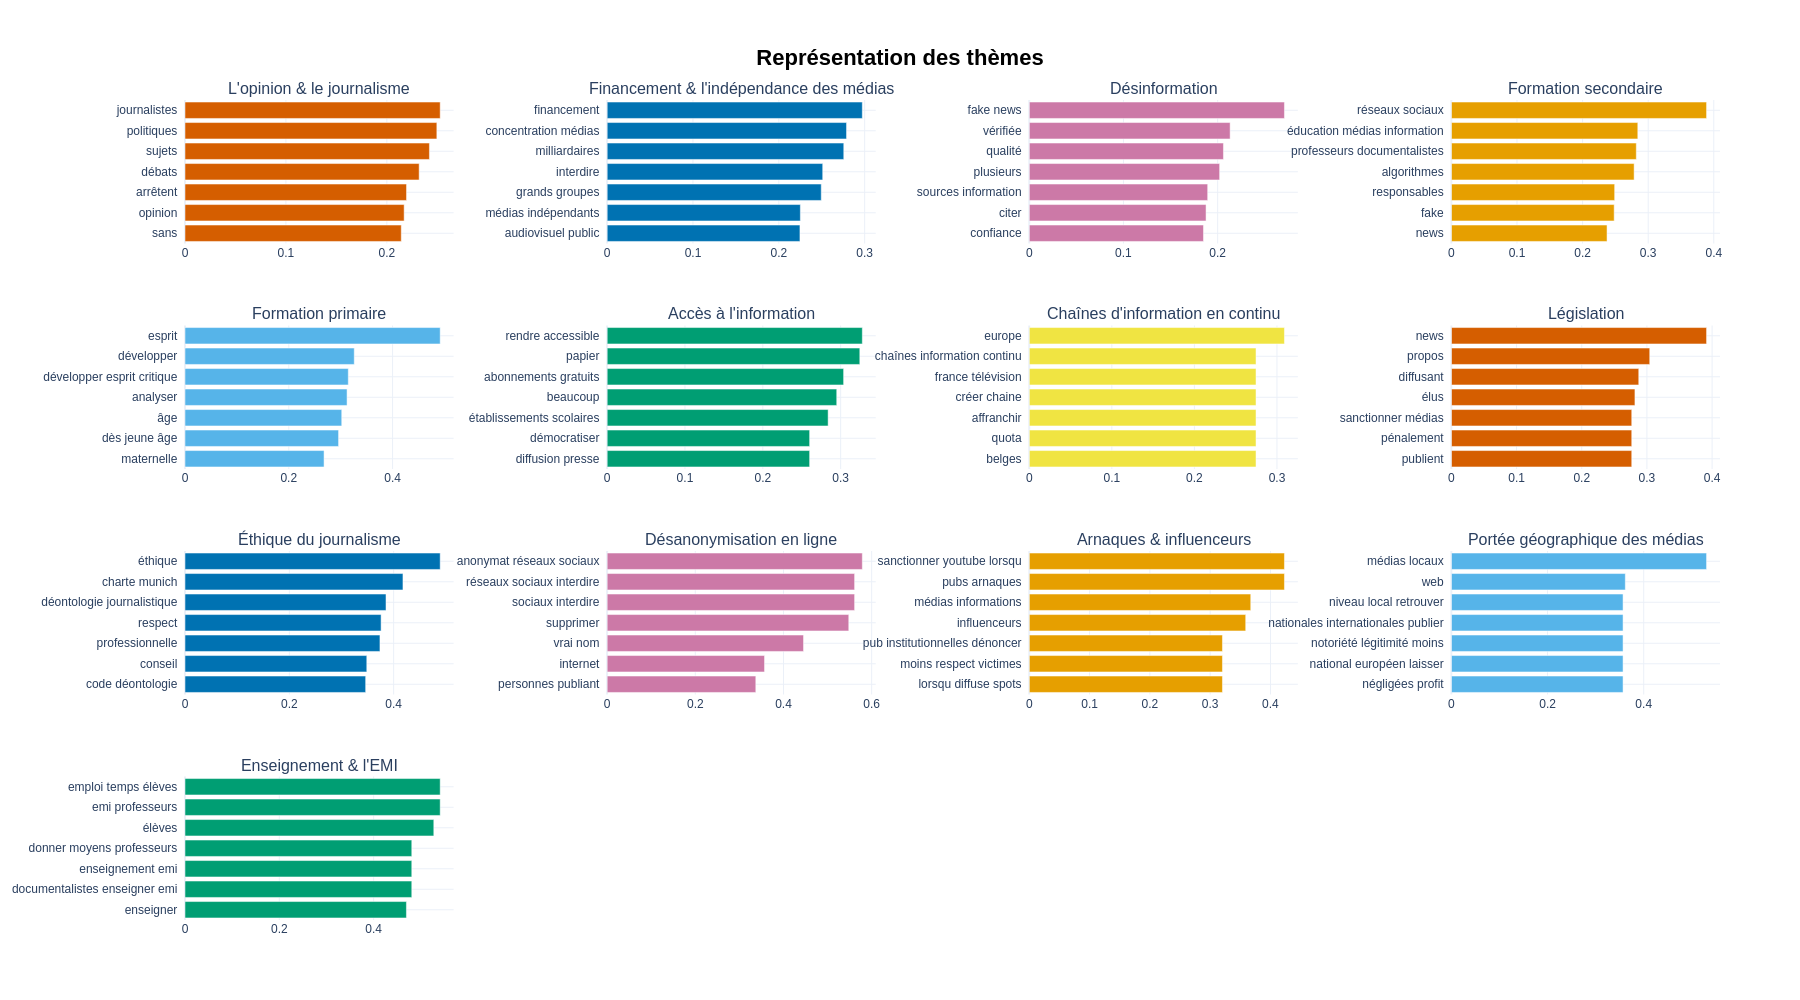 https://medialab.github.io/defacto-consultation/topic_visualisations/barchart.png